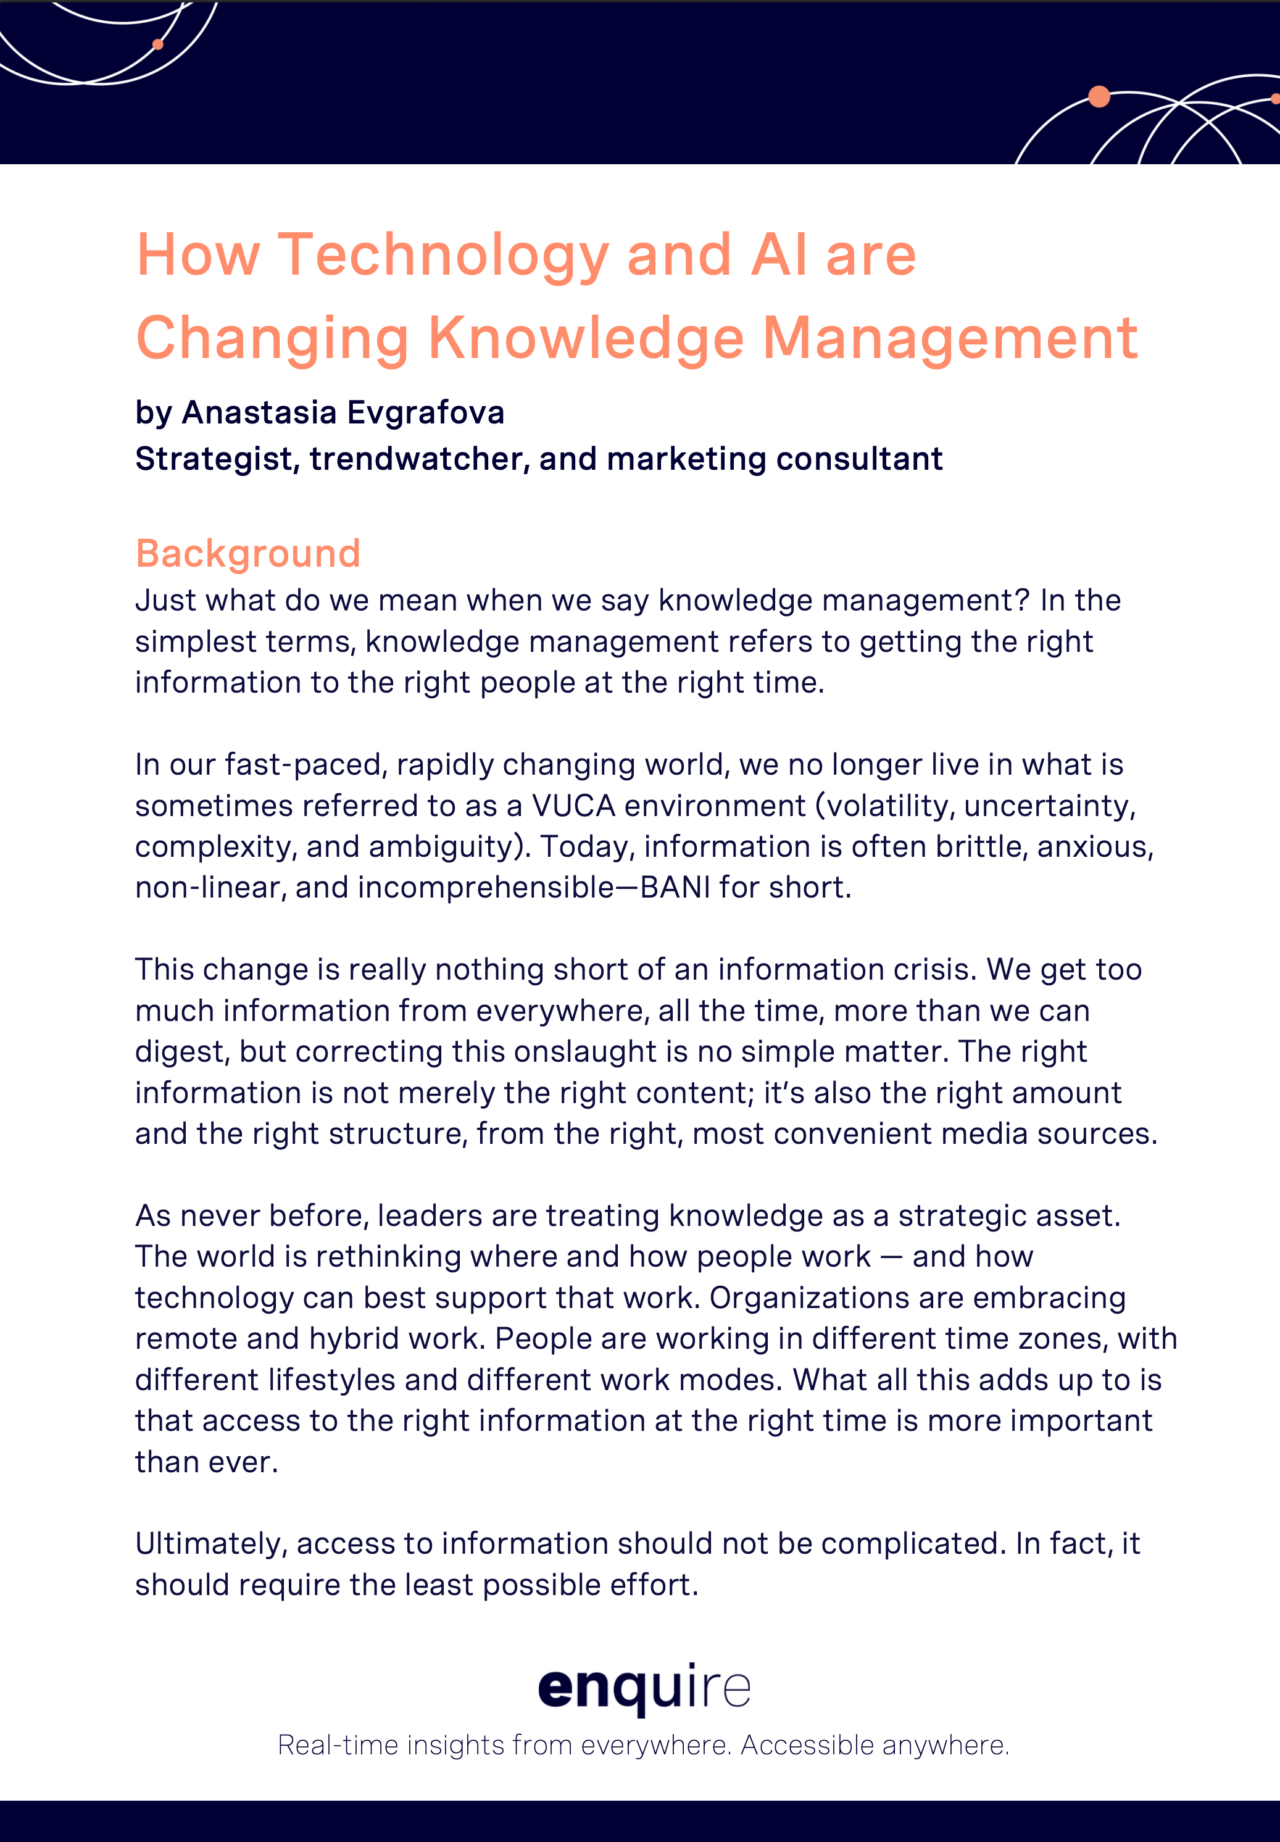 How Technology and AI are Changing Knowledge Management